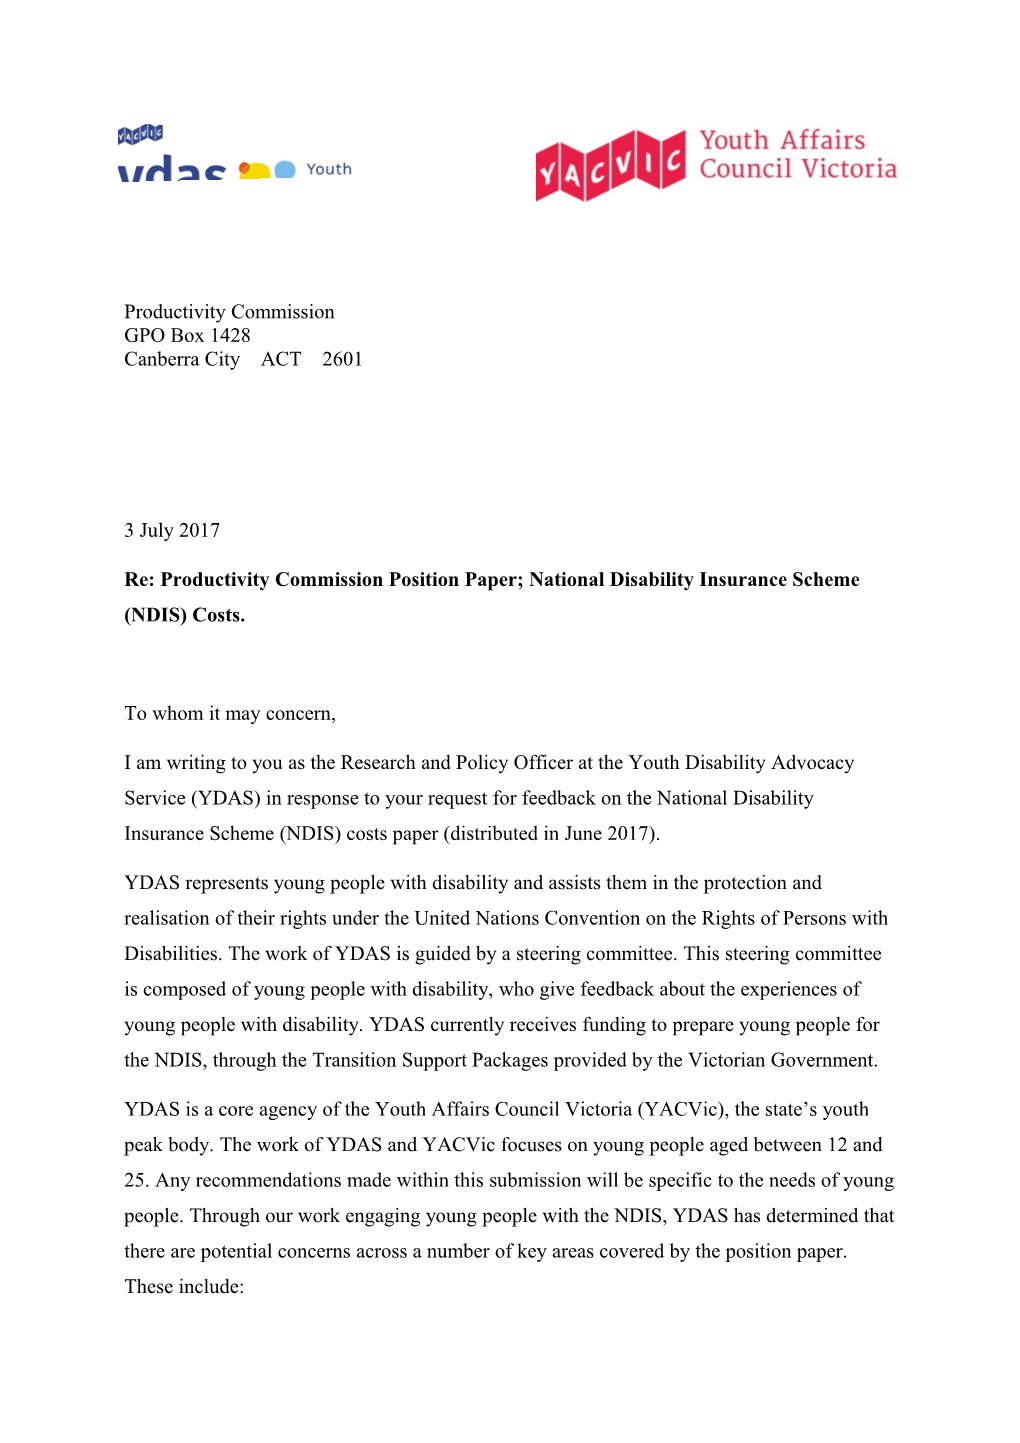 Submission PP262 - Youth Disability Advocacy Service (YDAS) - National Disability Insurance